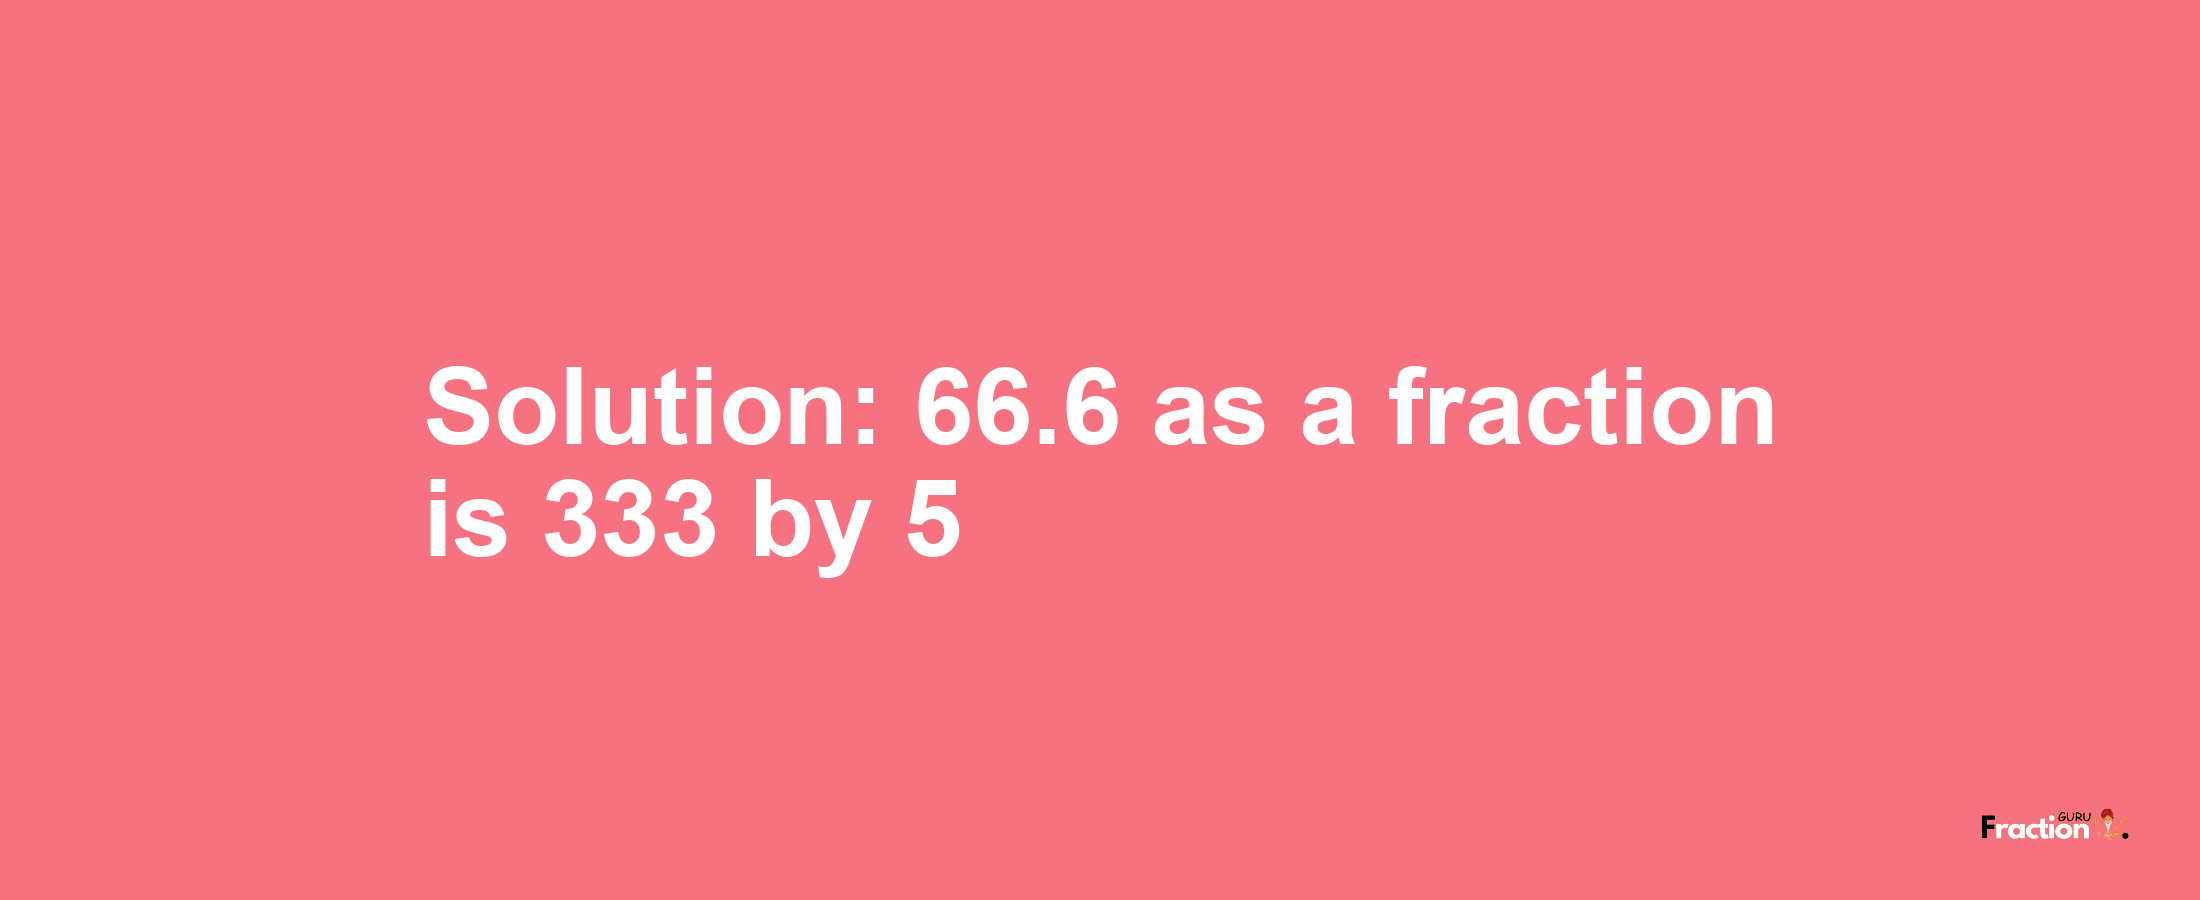 Solution:66.6 as a fraction is 333/5